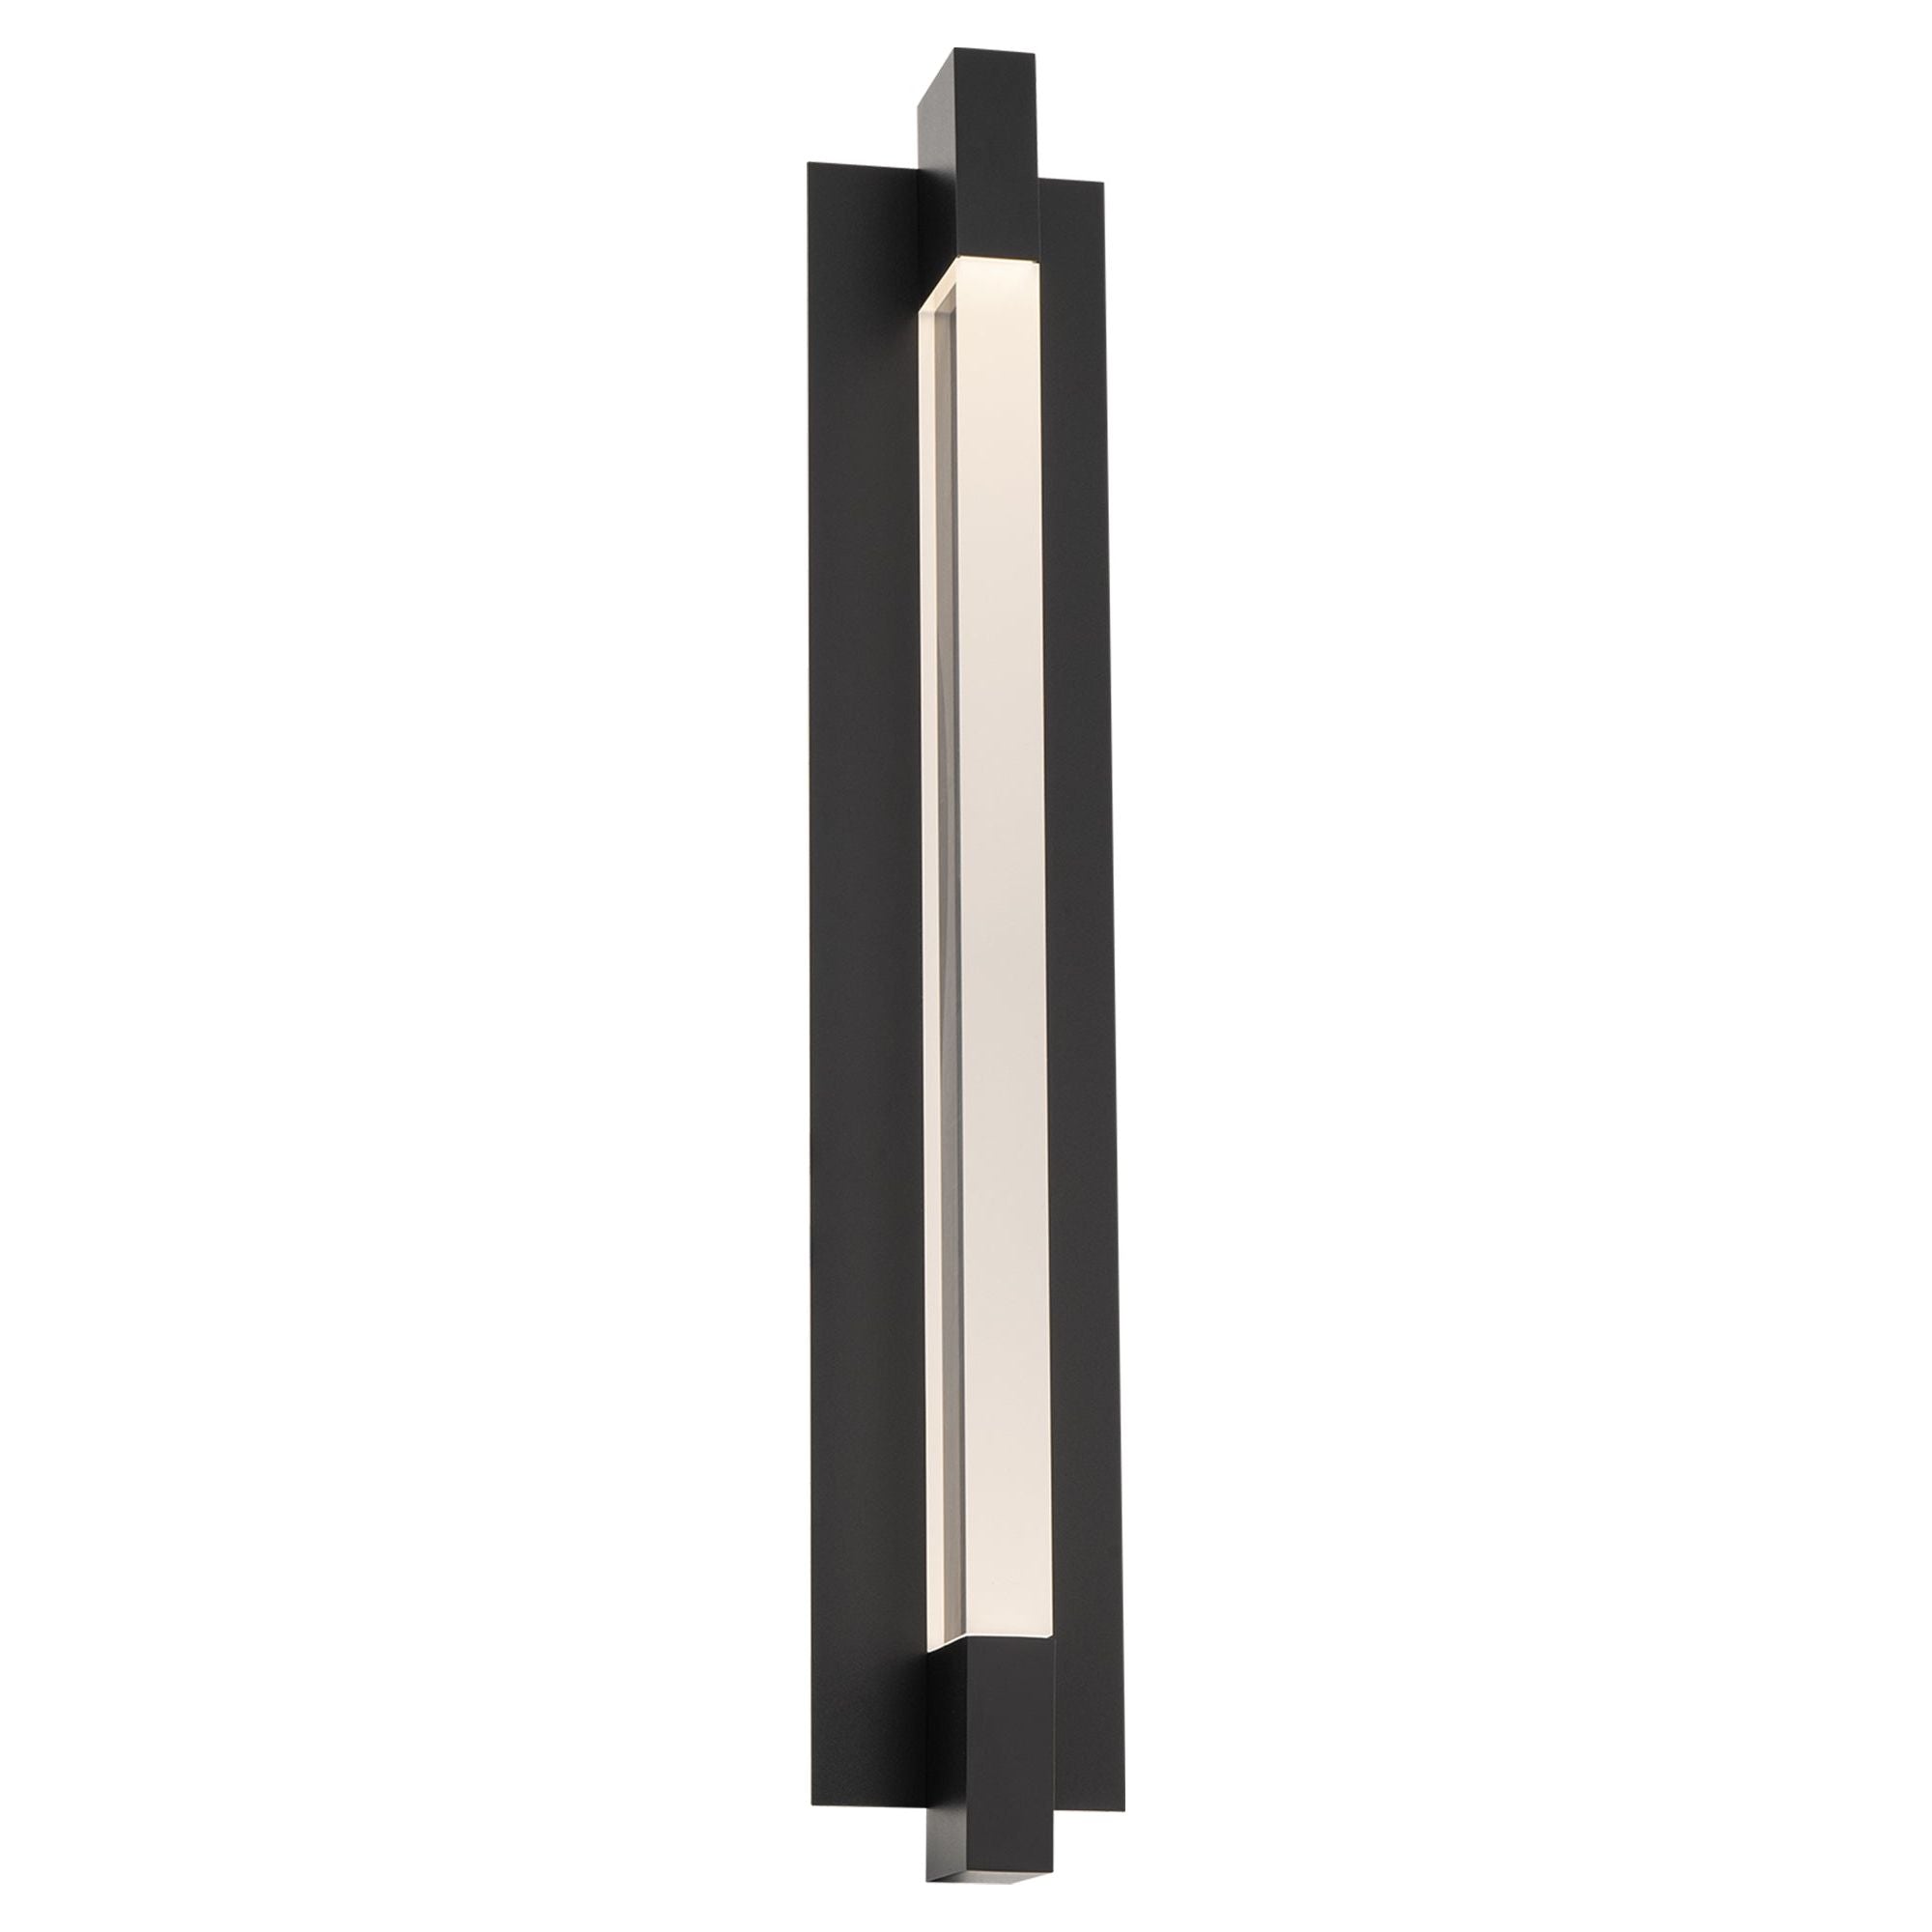 Heliograph 32" LED Outdoor Wall Light